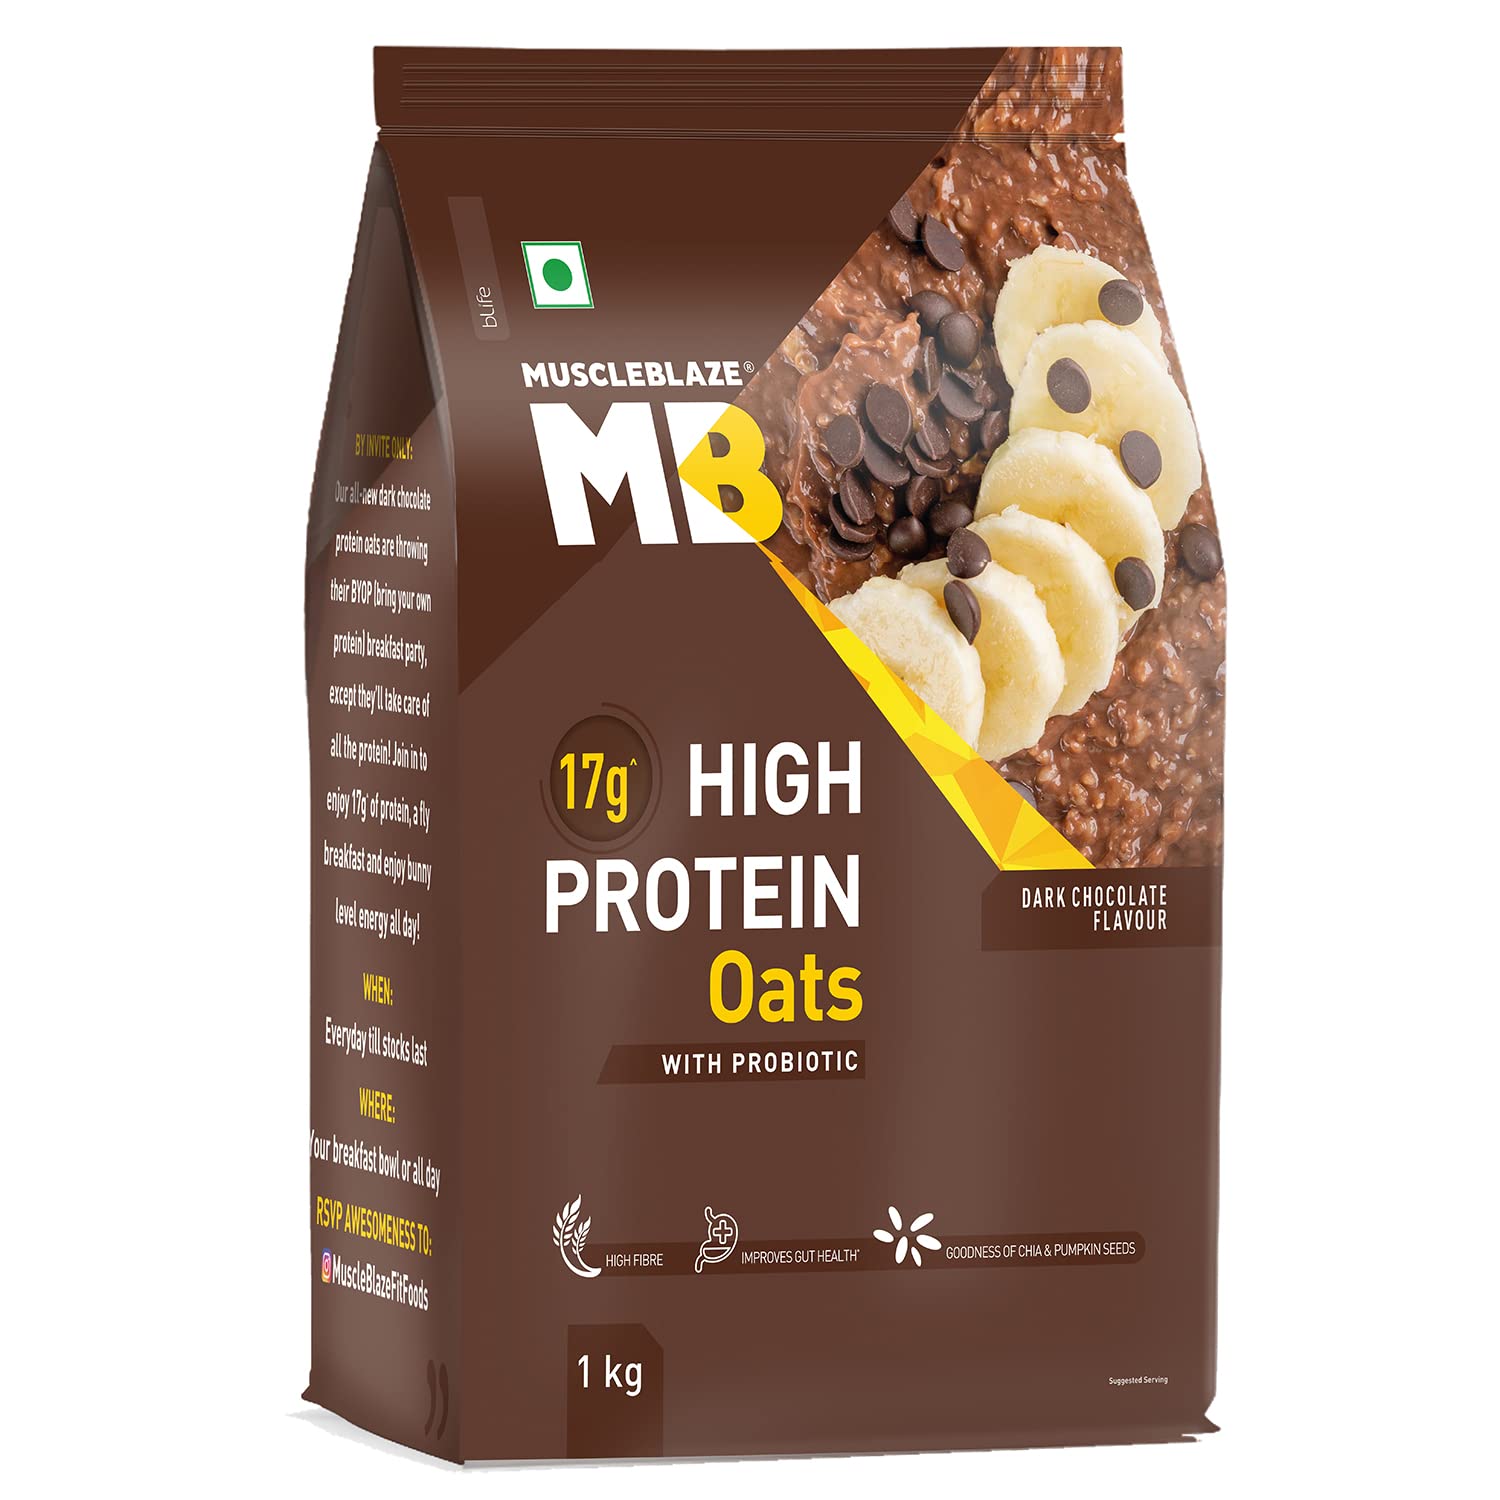 MuscleBlaze High Protein Oats with Added Probiotics, 17 g Protein, Rolled Oats, Breakfast Cereals, Gluten Free, Trans Fat Free, for Weight Management, Dark Chocolate, 400 g